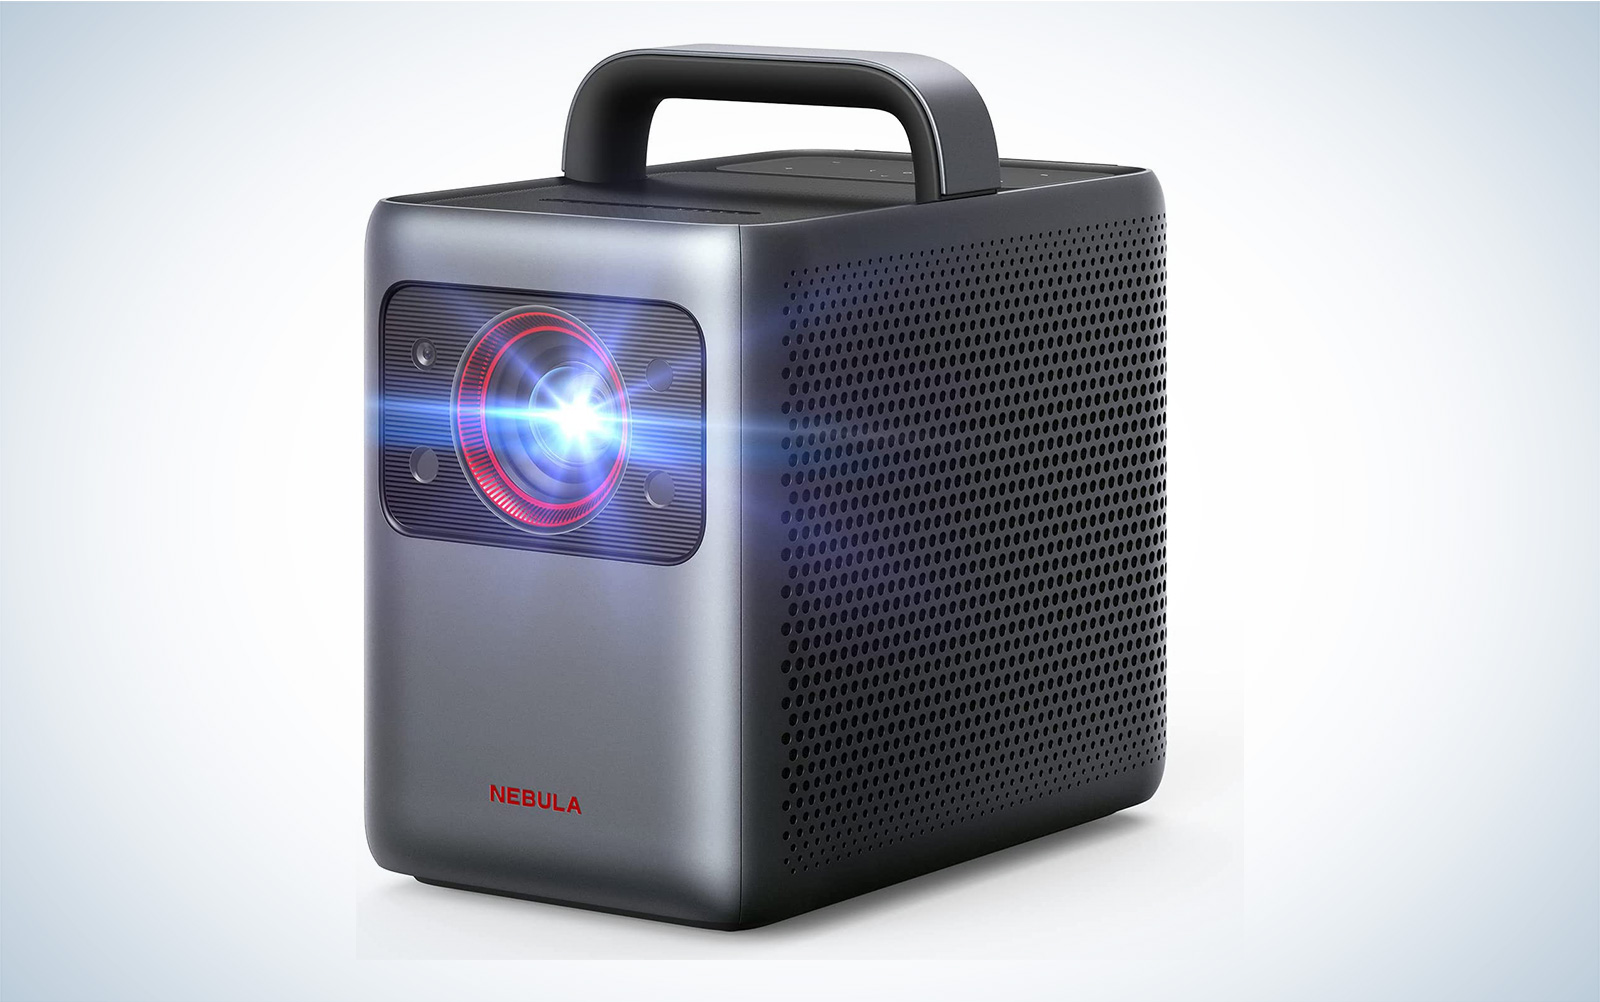 Anker Nebula projector prime early access sale